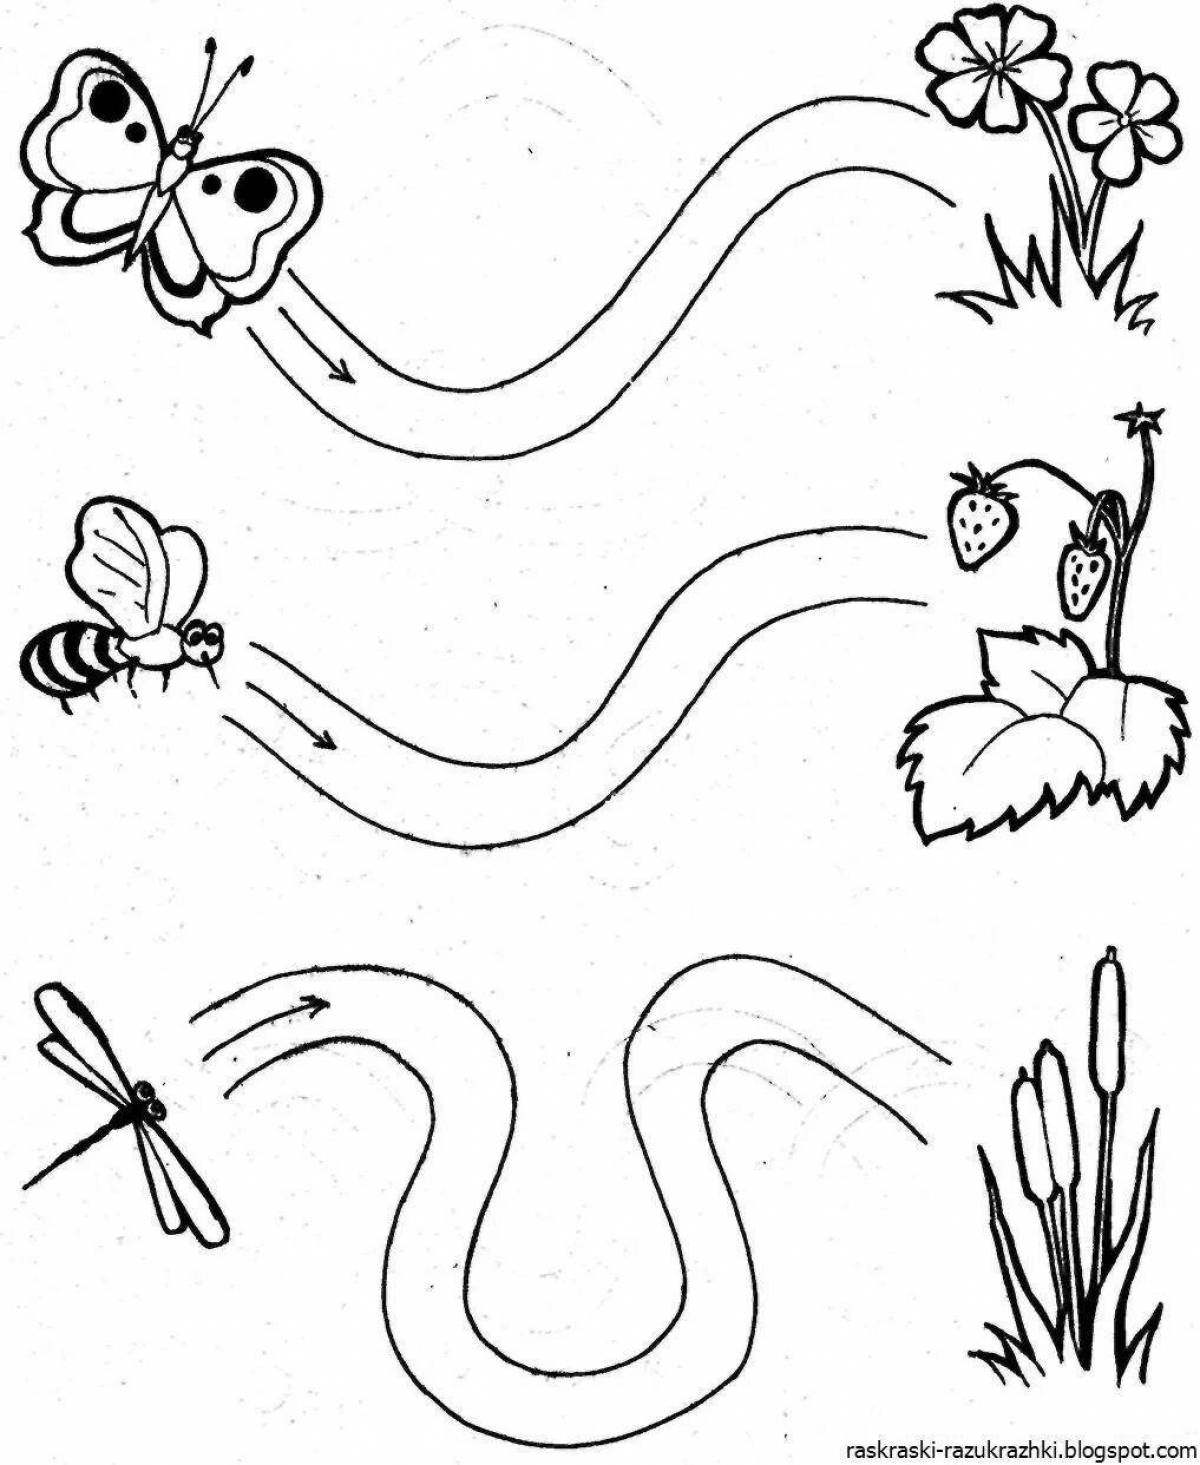 Coloring pages for children 4 years old